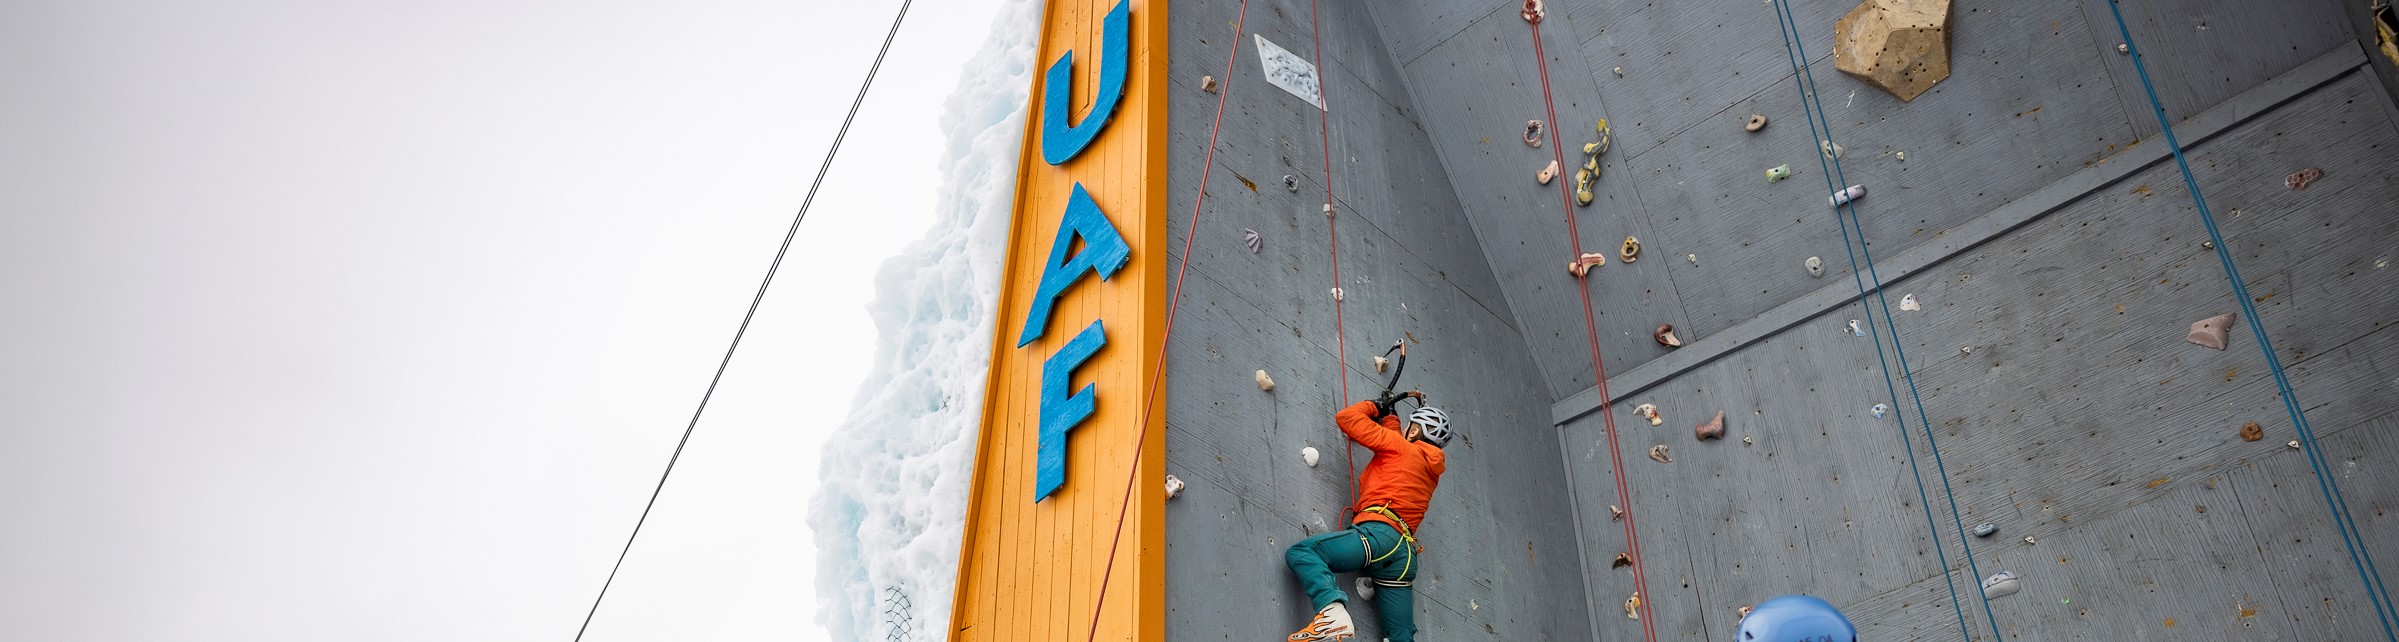 Climbing the outdoor ice wall